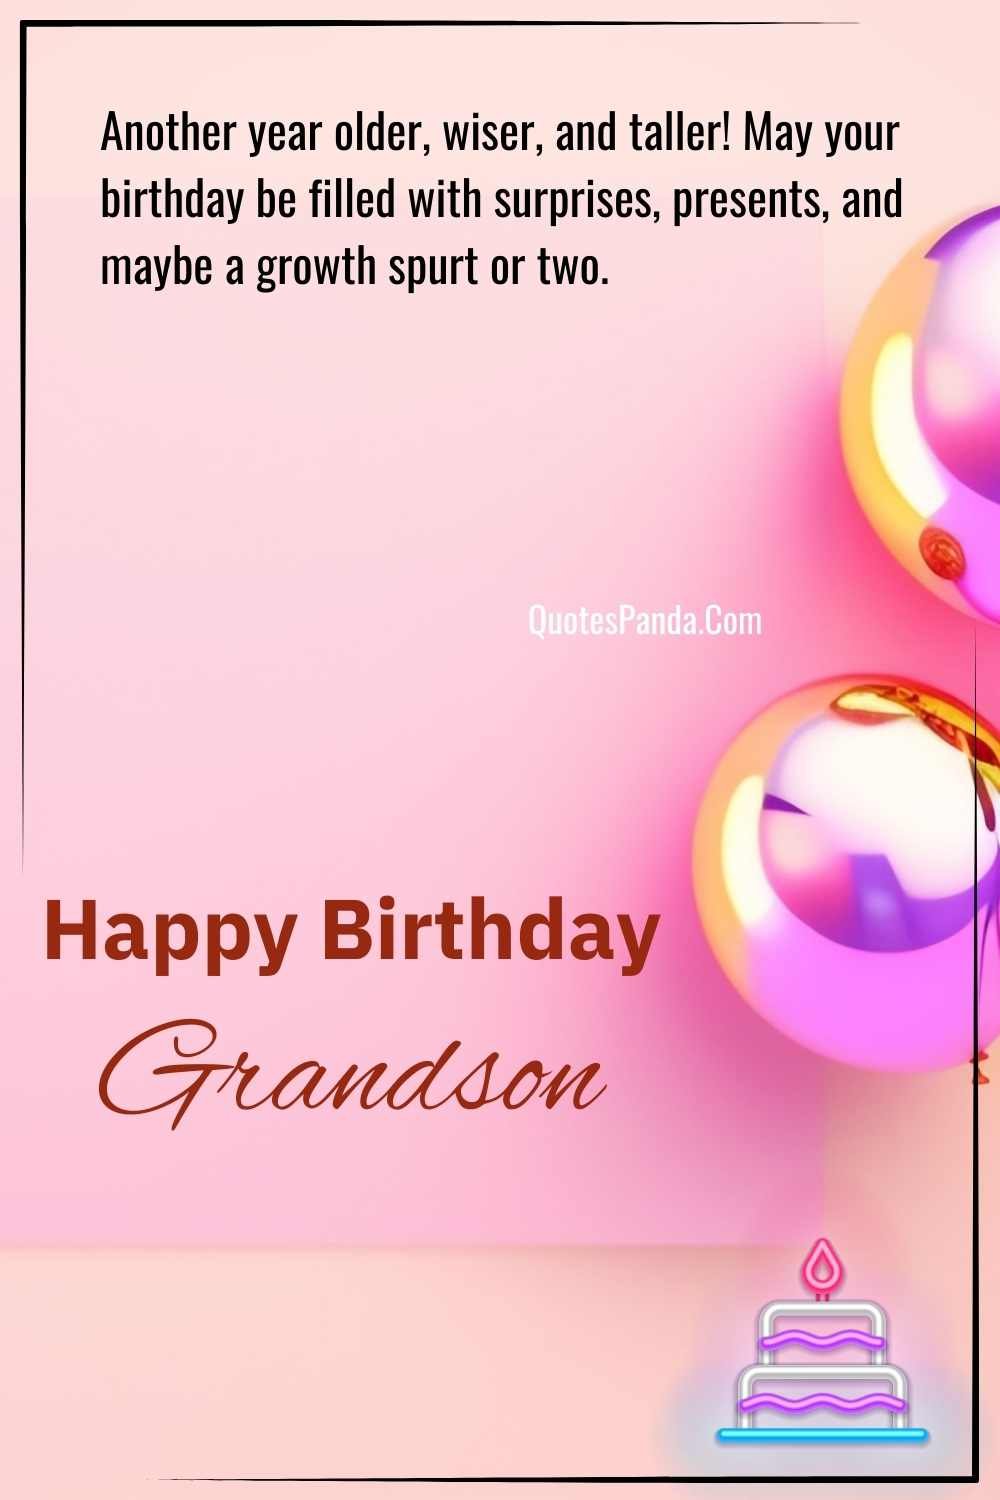 122 Funny Birthday Wishes For Grandson